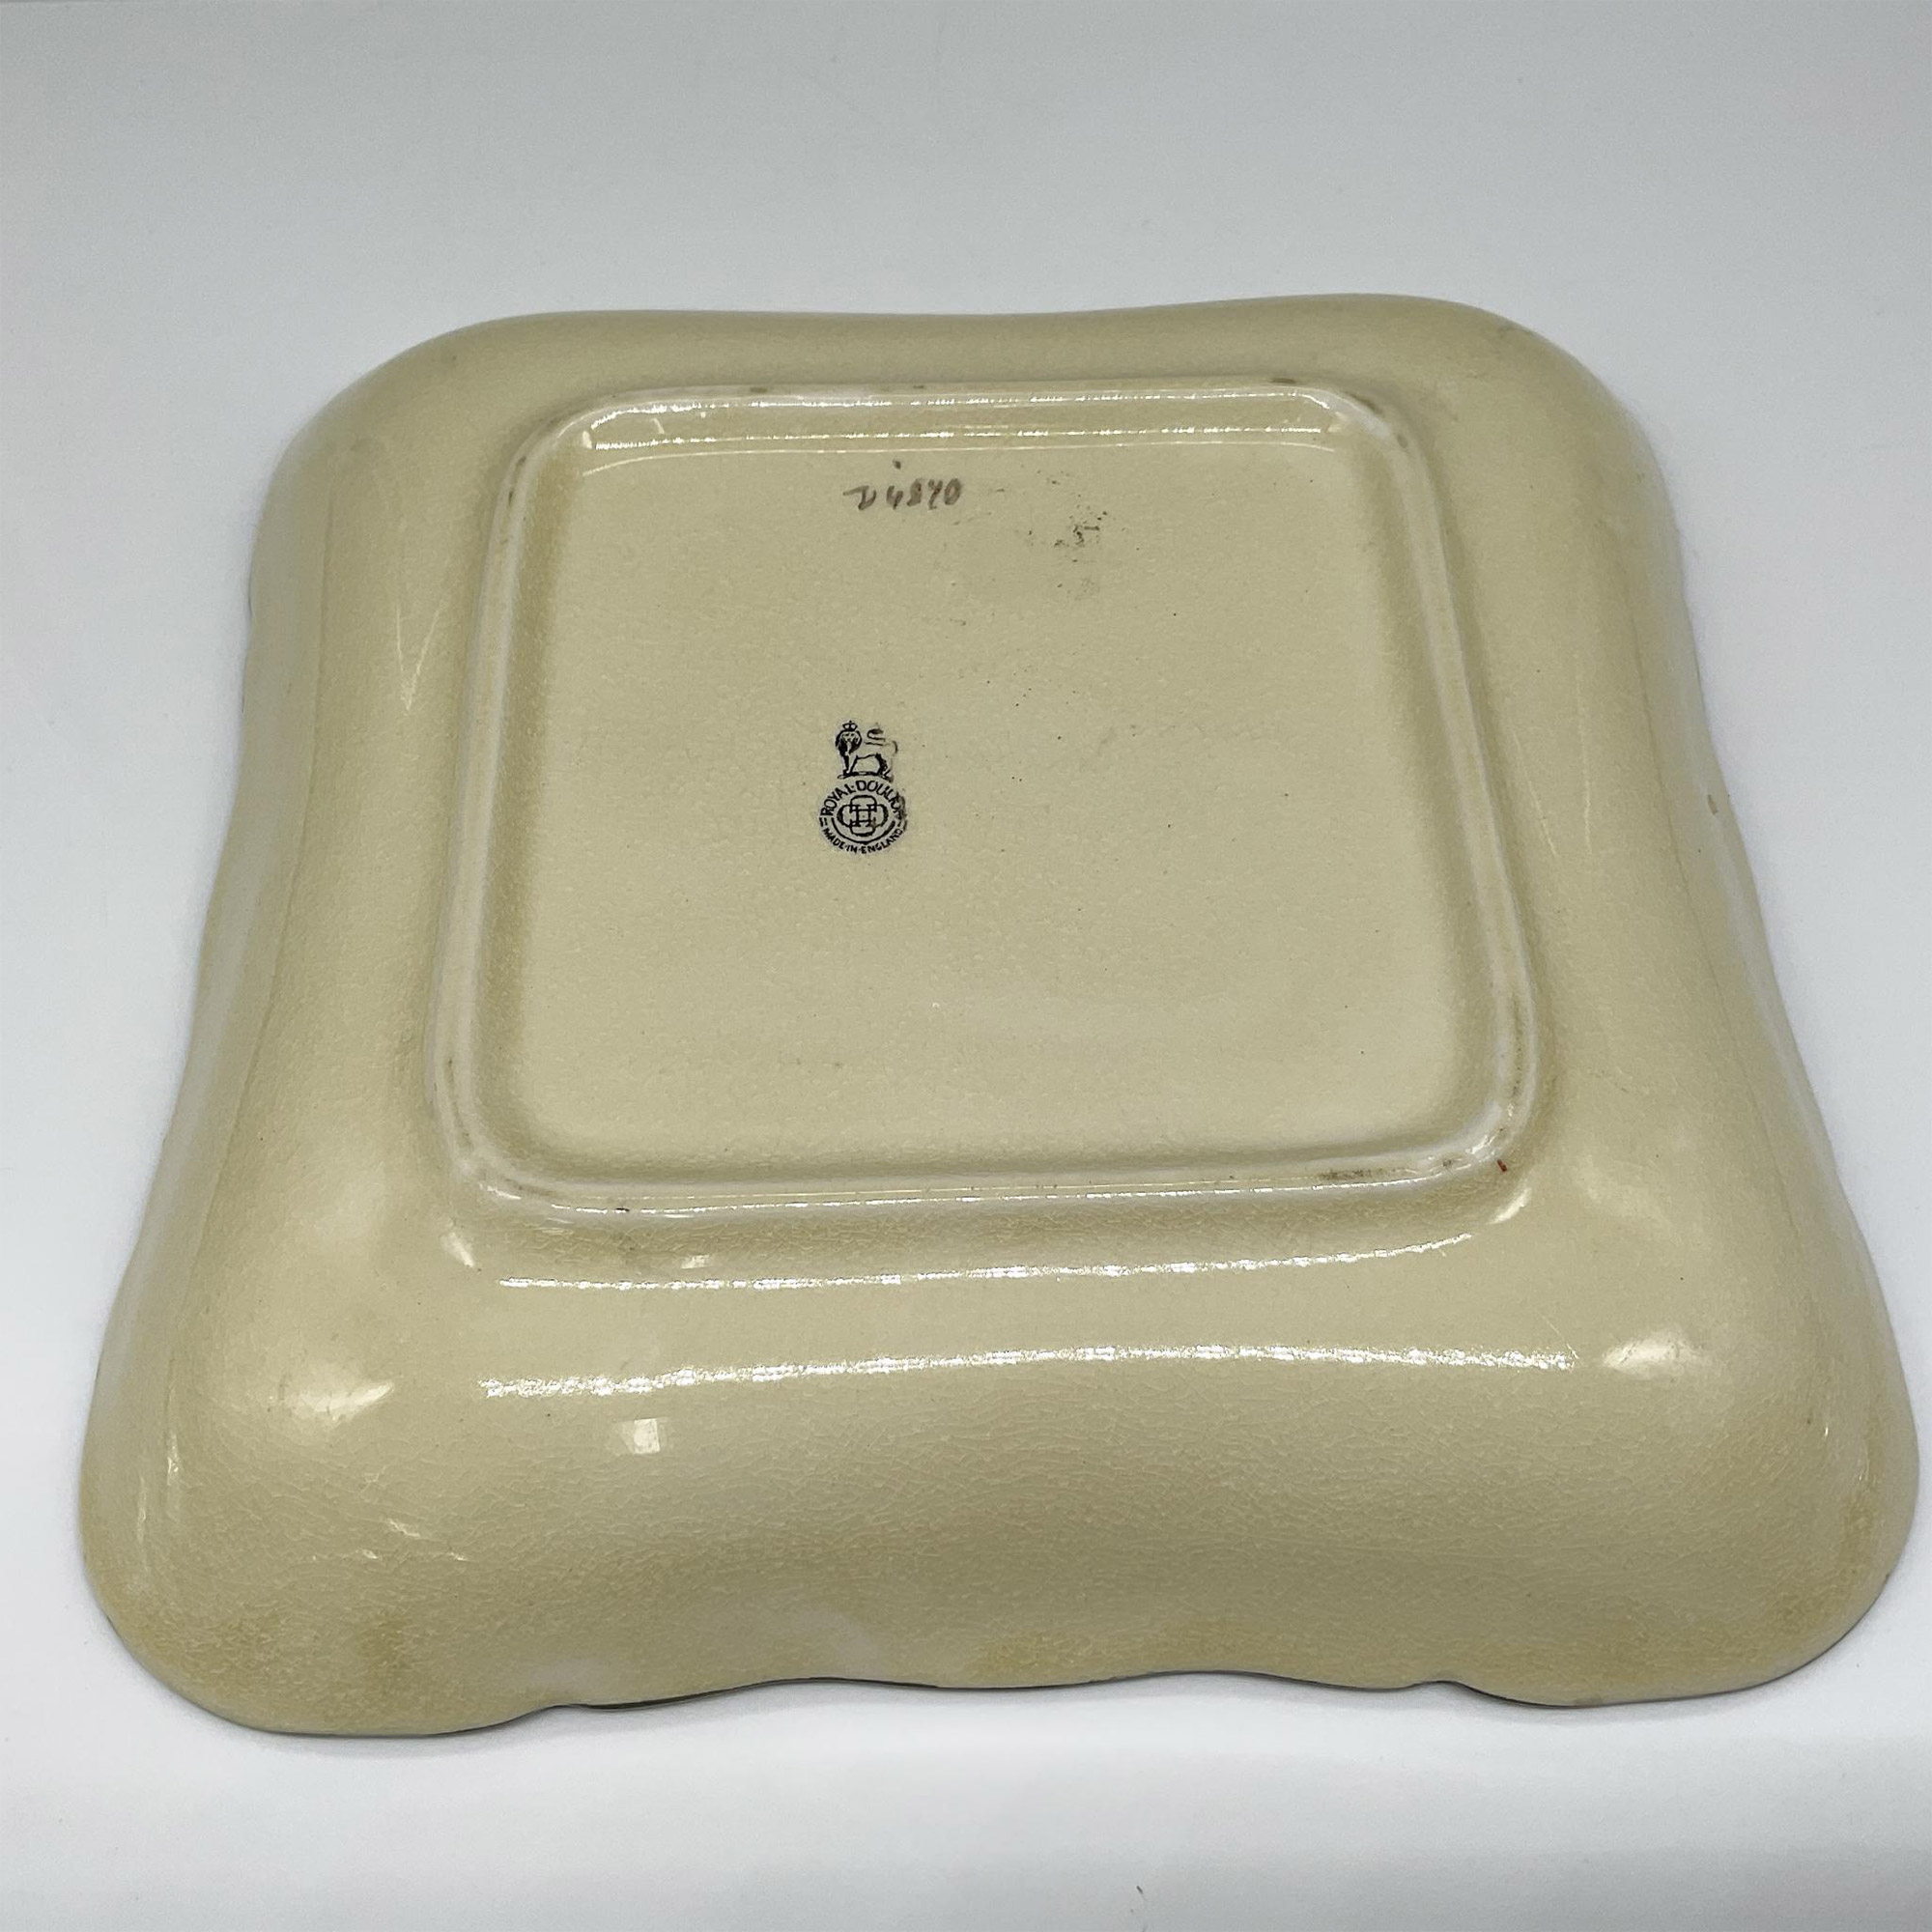 Royal Doulton Series Ware Plate, Fireside - Image 3 of 3